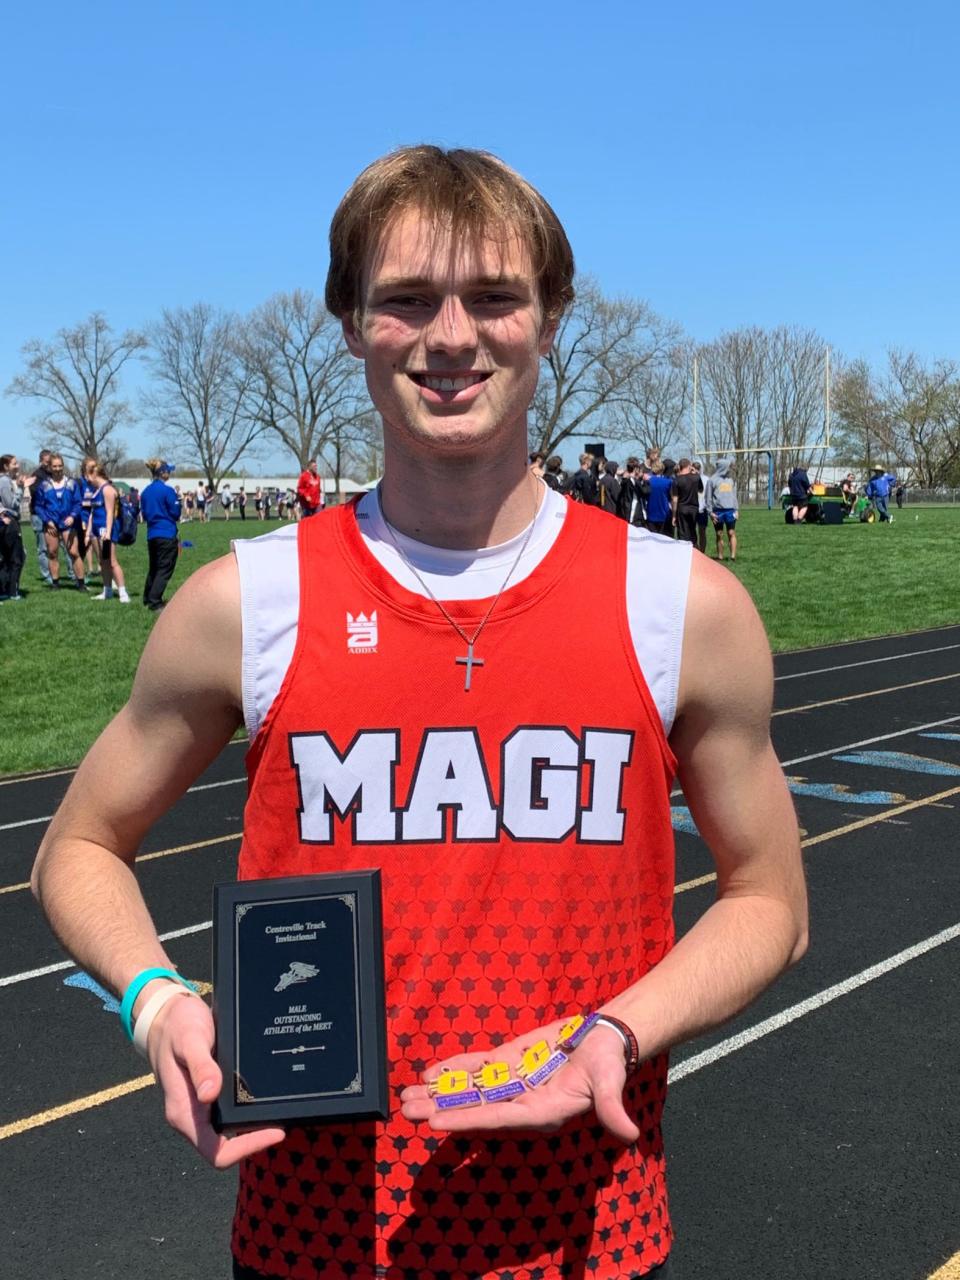 Alex Stoll of Colon was named the Most Outstanding Male athlete at the Centreville Invitational on Saturday. He won both hurdle events.